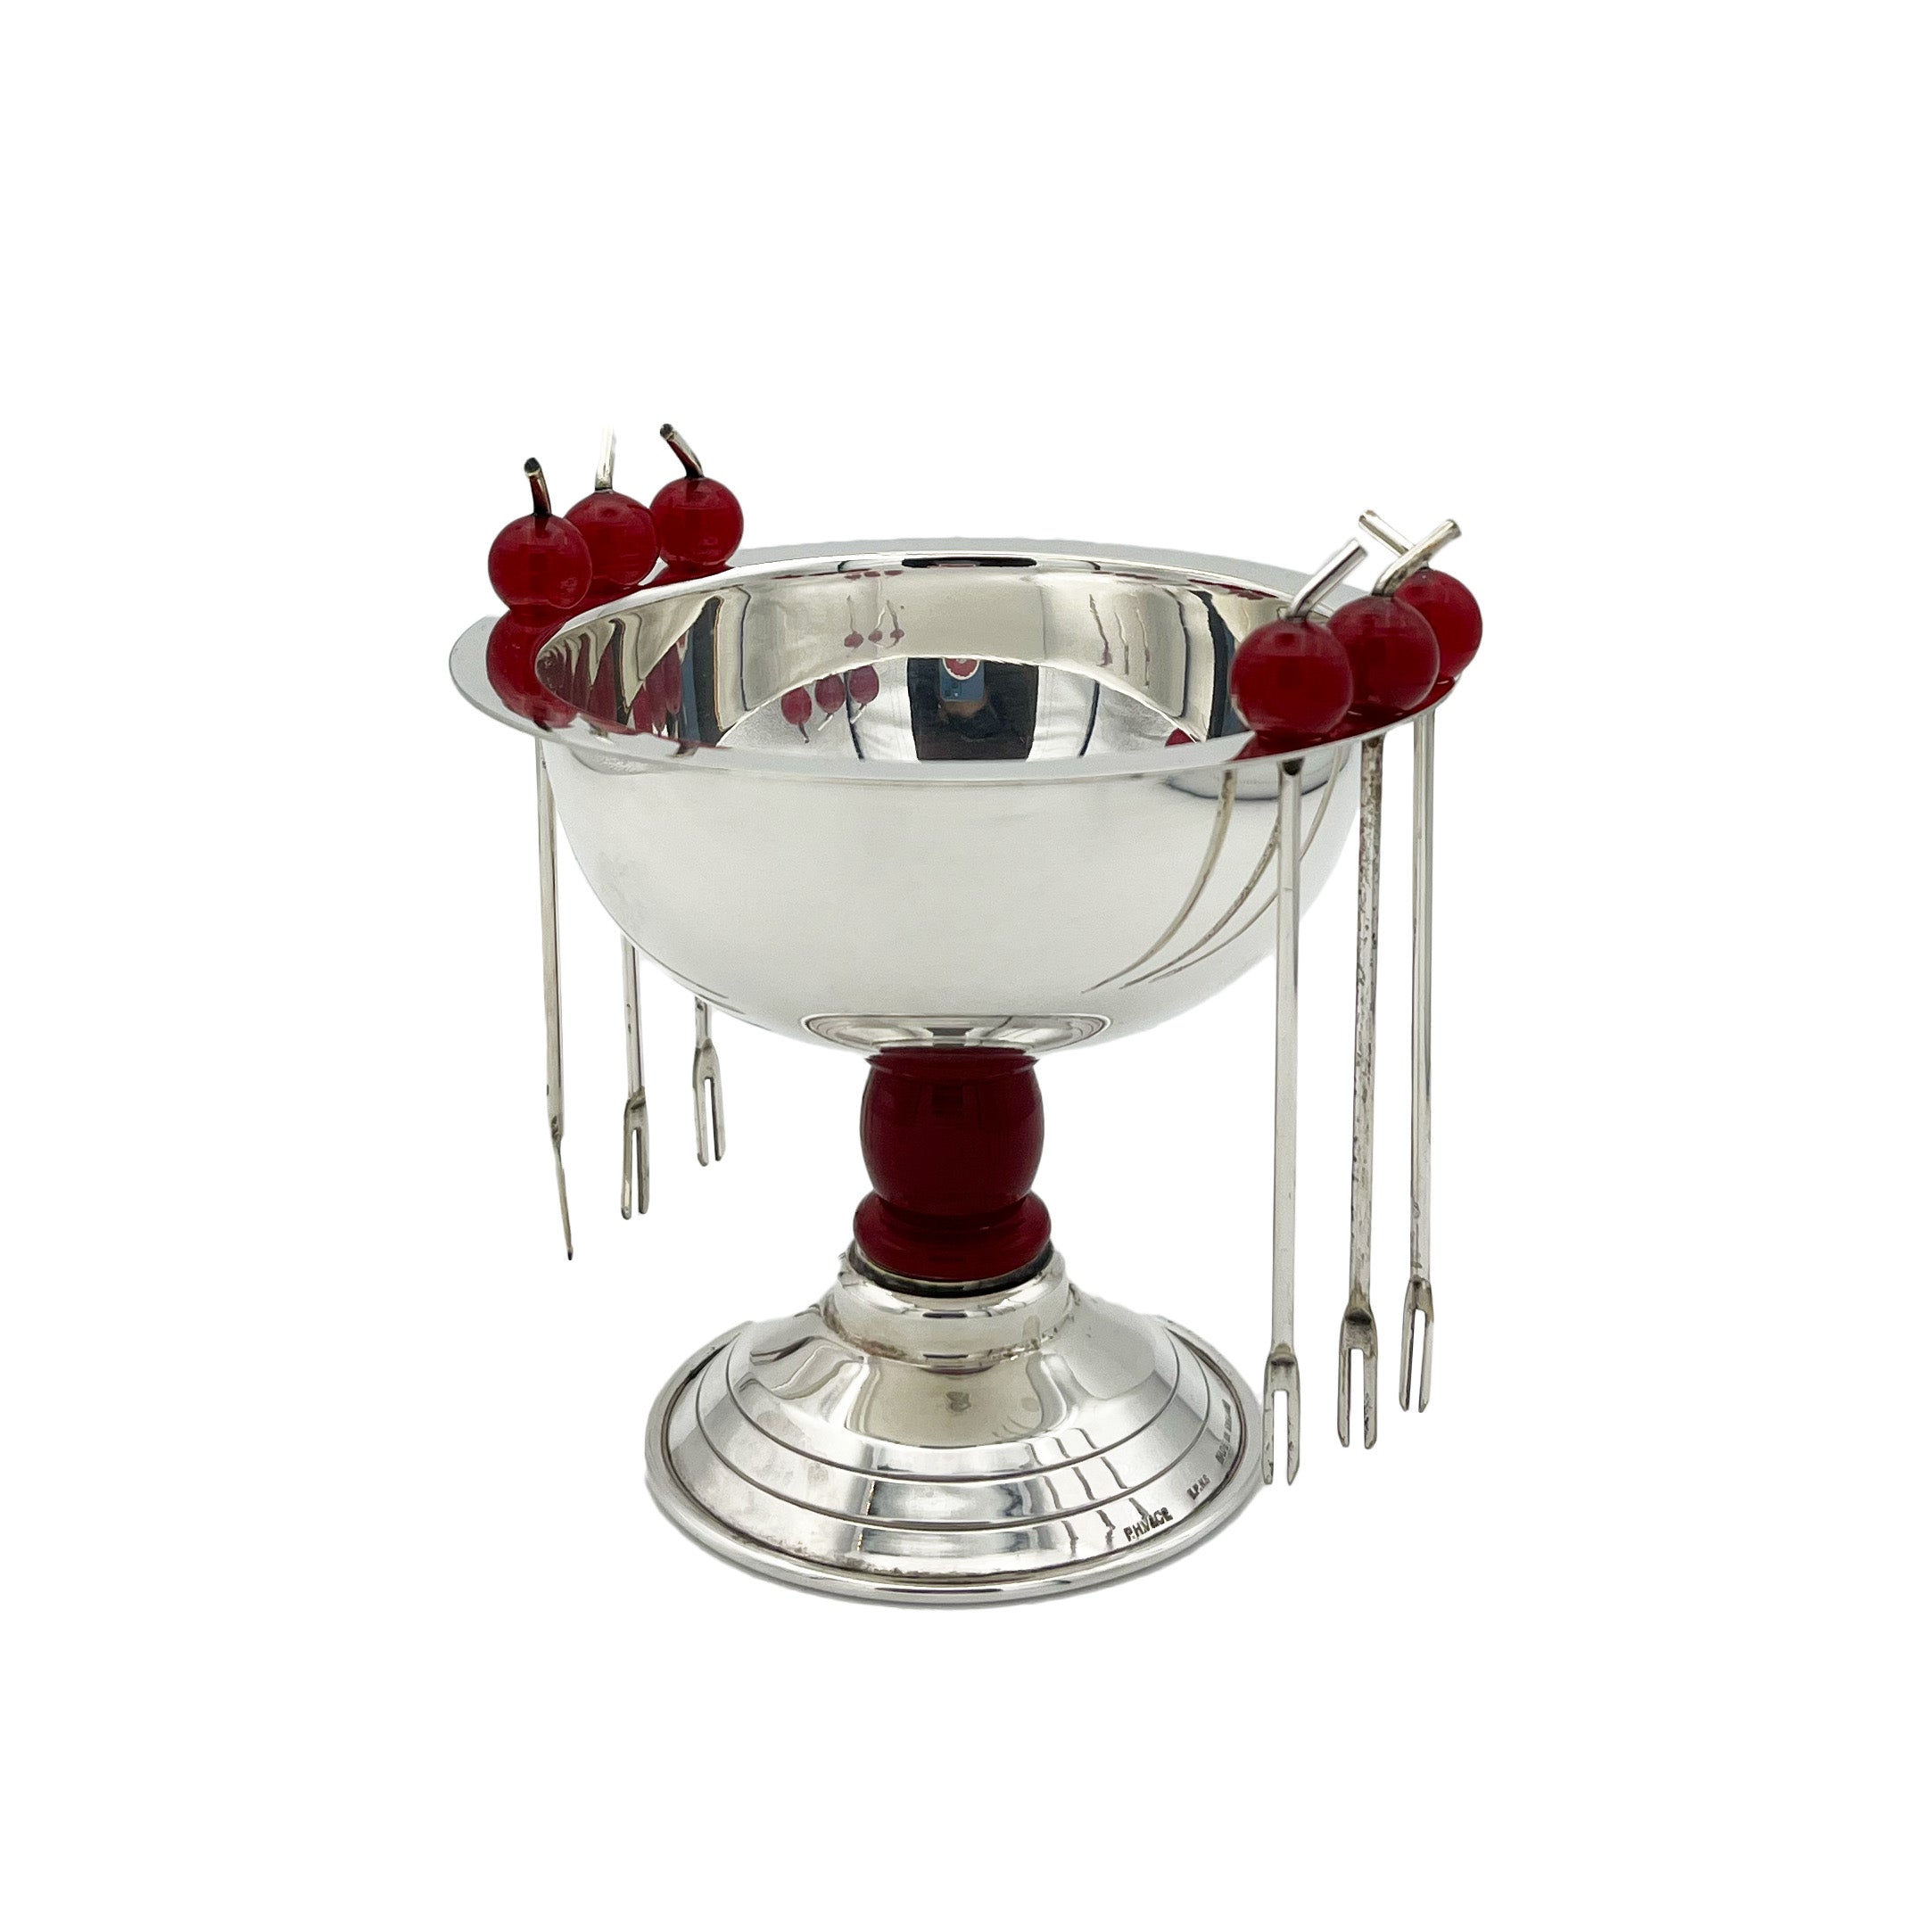 Antique Silver Plated Olive Bowl with Cocktail Sticks c.1930